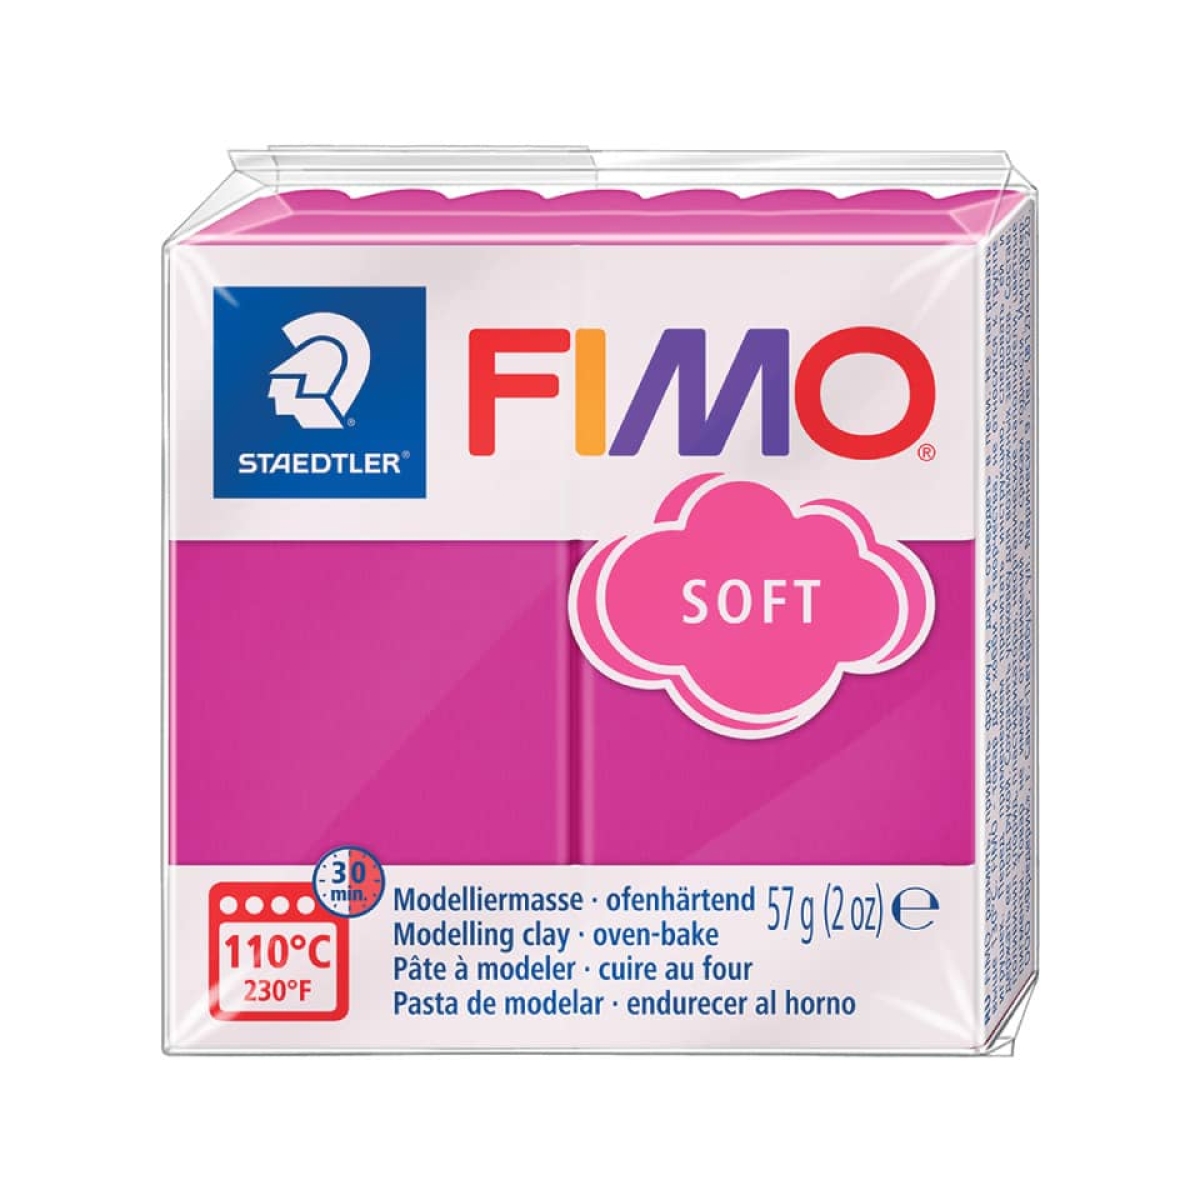 STAEDTLERModeling clay FIMO® soft, 57 g, raspberry 8020-22-Price for 0.0570 kgArticle-No: 4006608809478